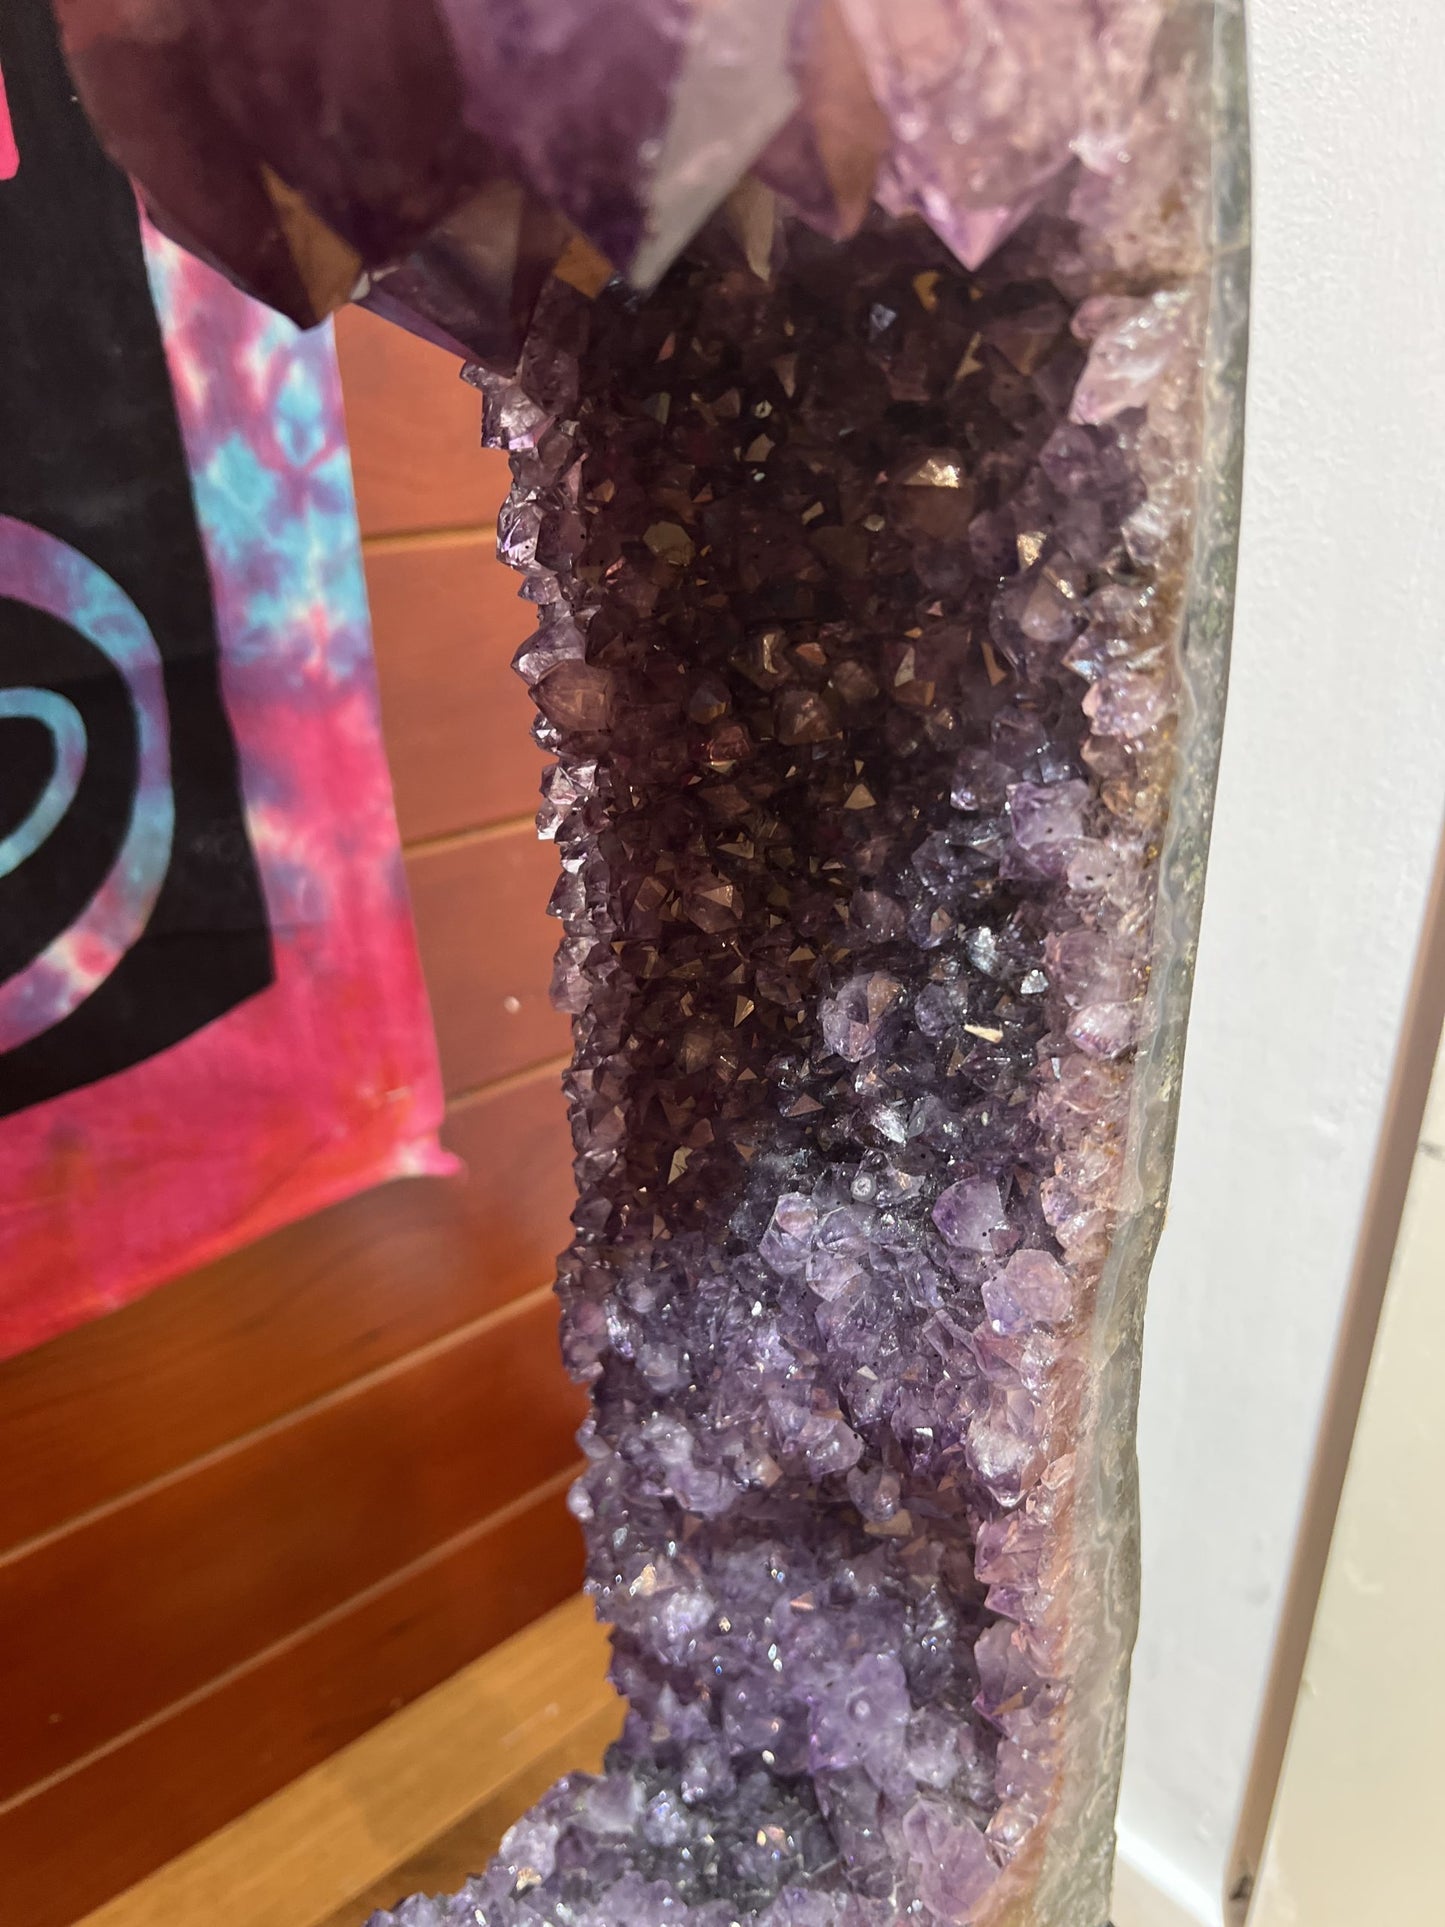 Amethyst Slice on Spinning Stand (15.8kg)